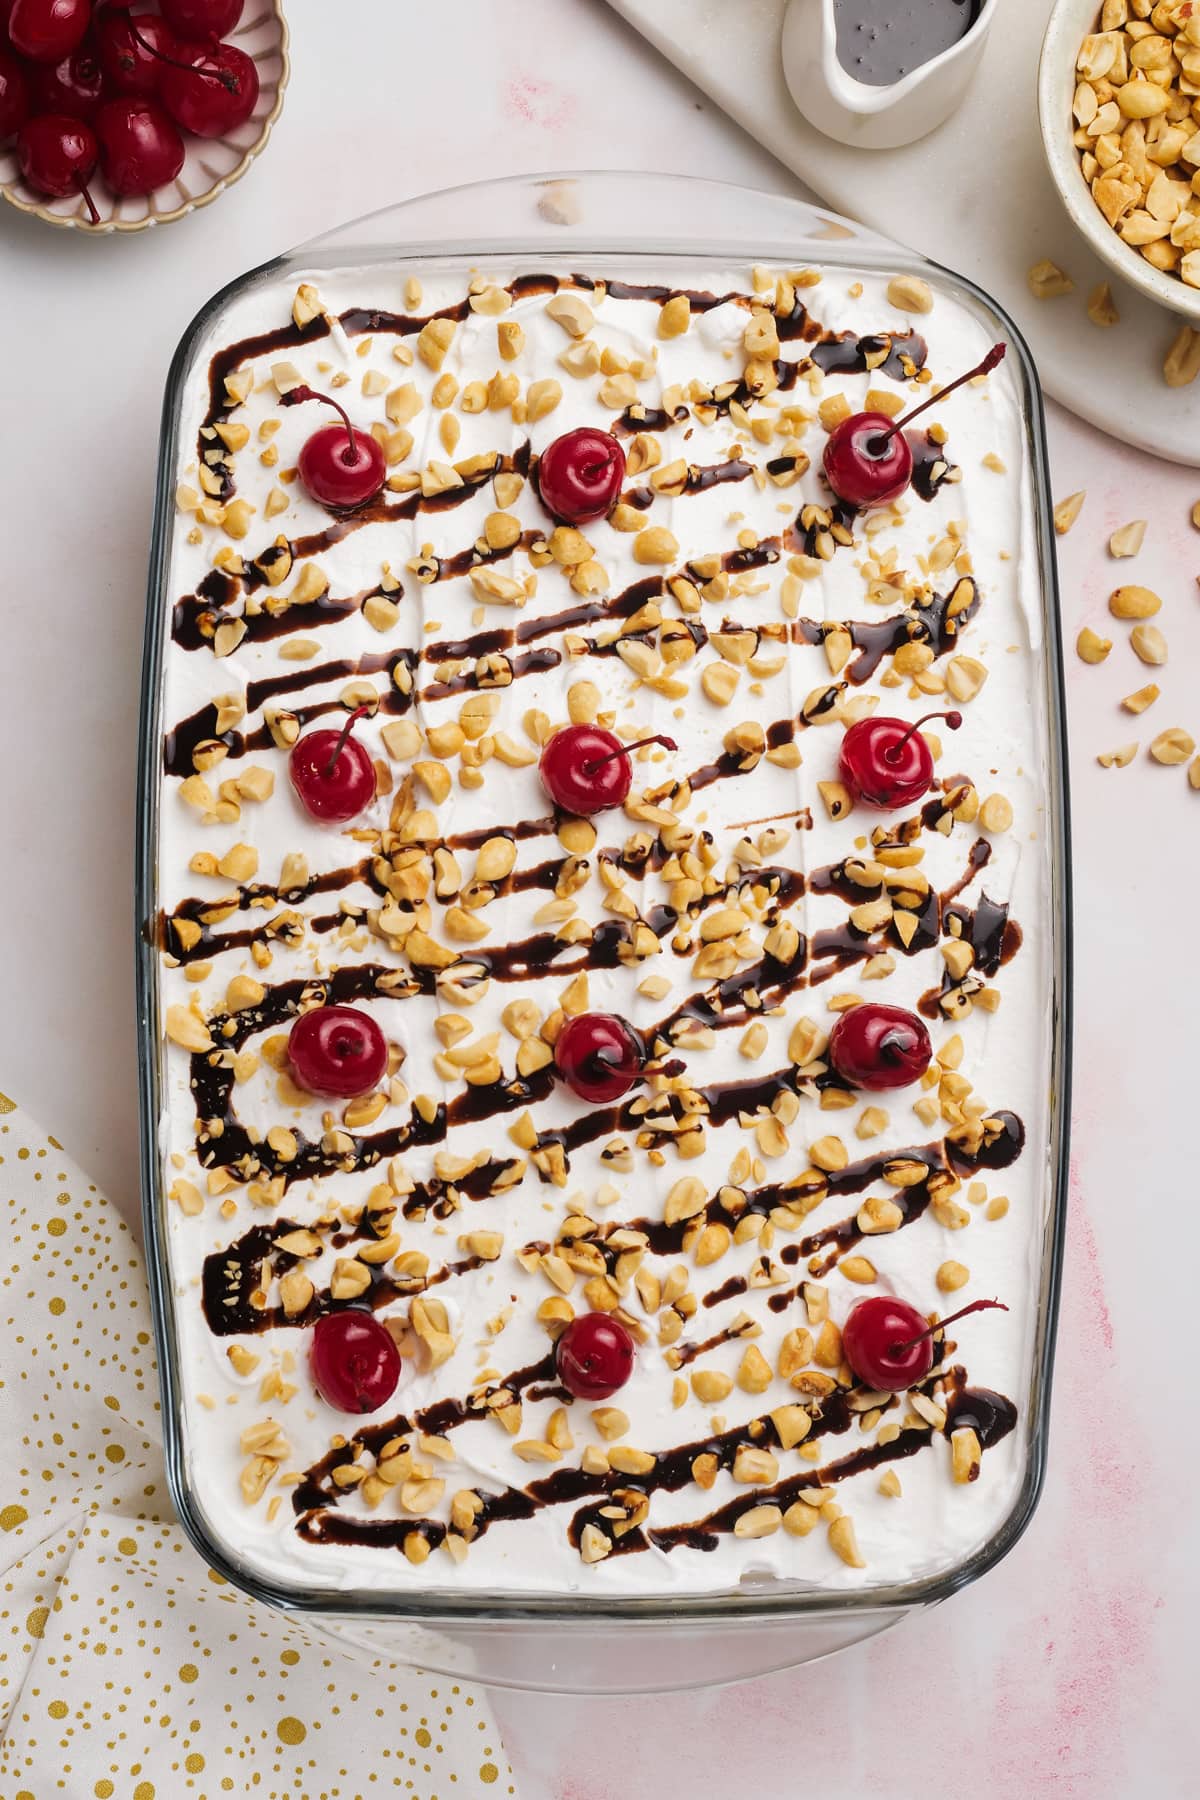 hot fudge drizzled across cake with 12 cherries on top